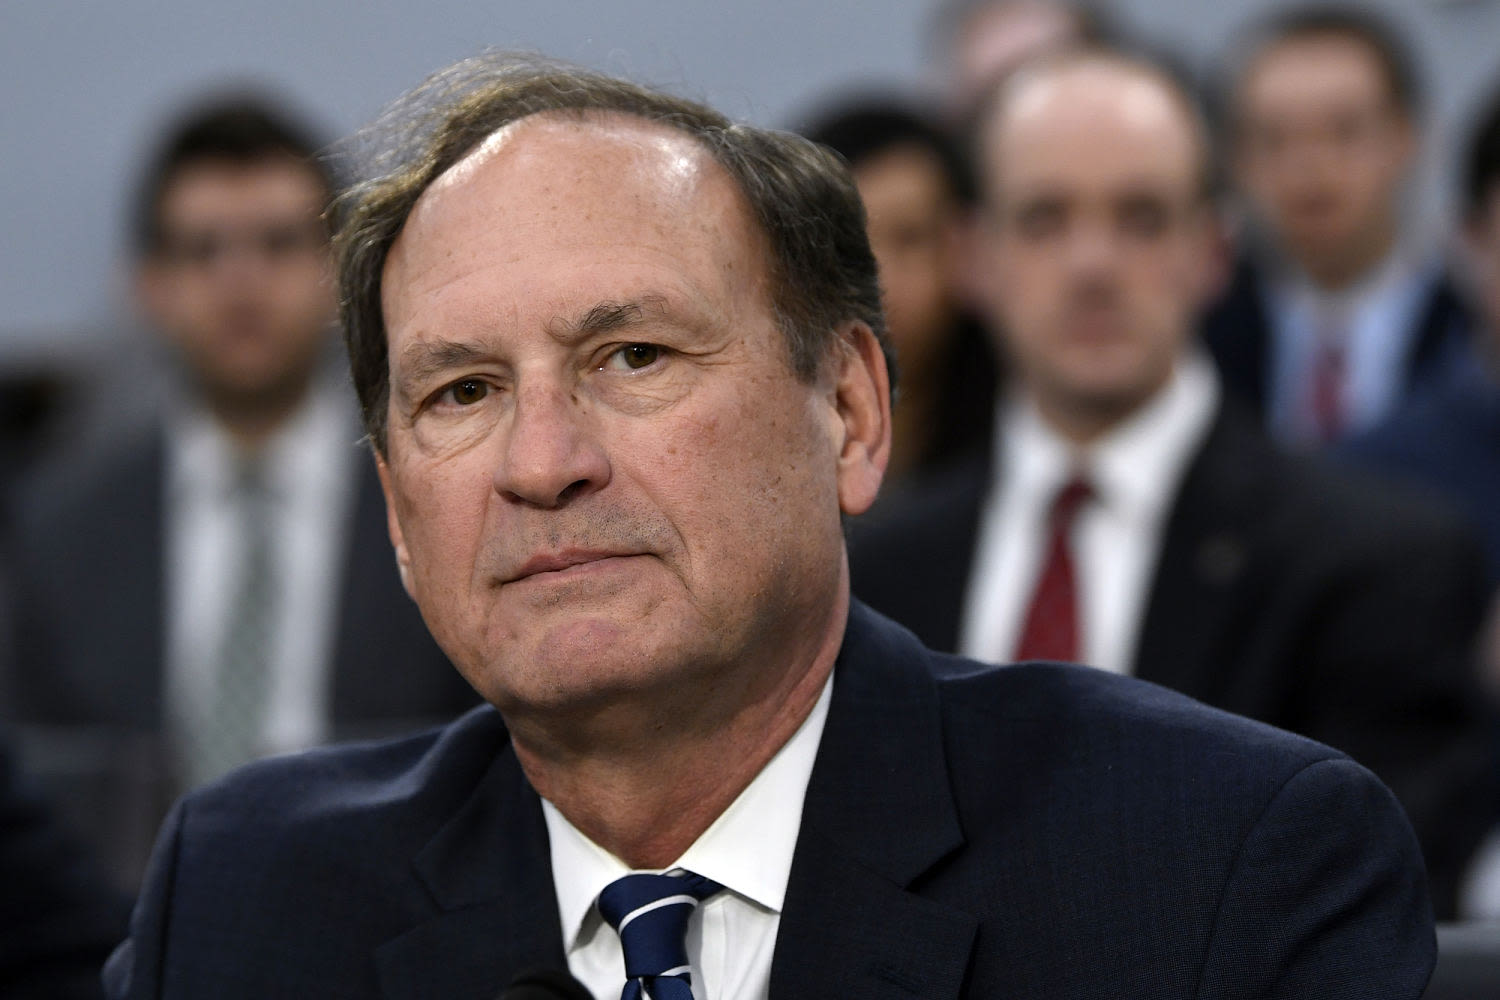 A Trump judge has just shown Alito how to recuse from a hot-button case